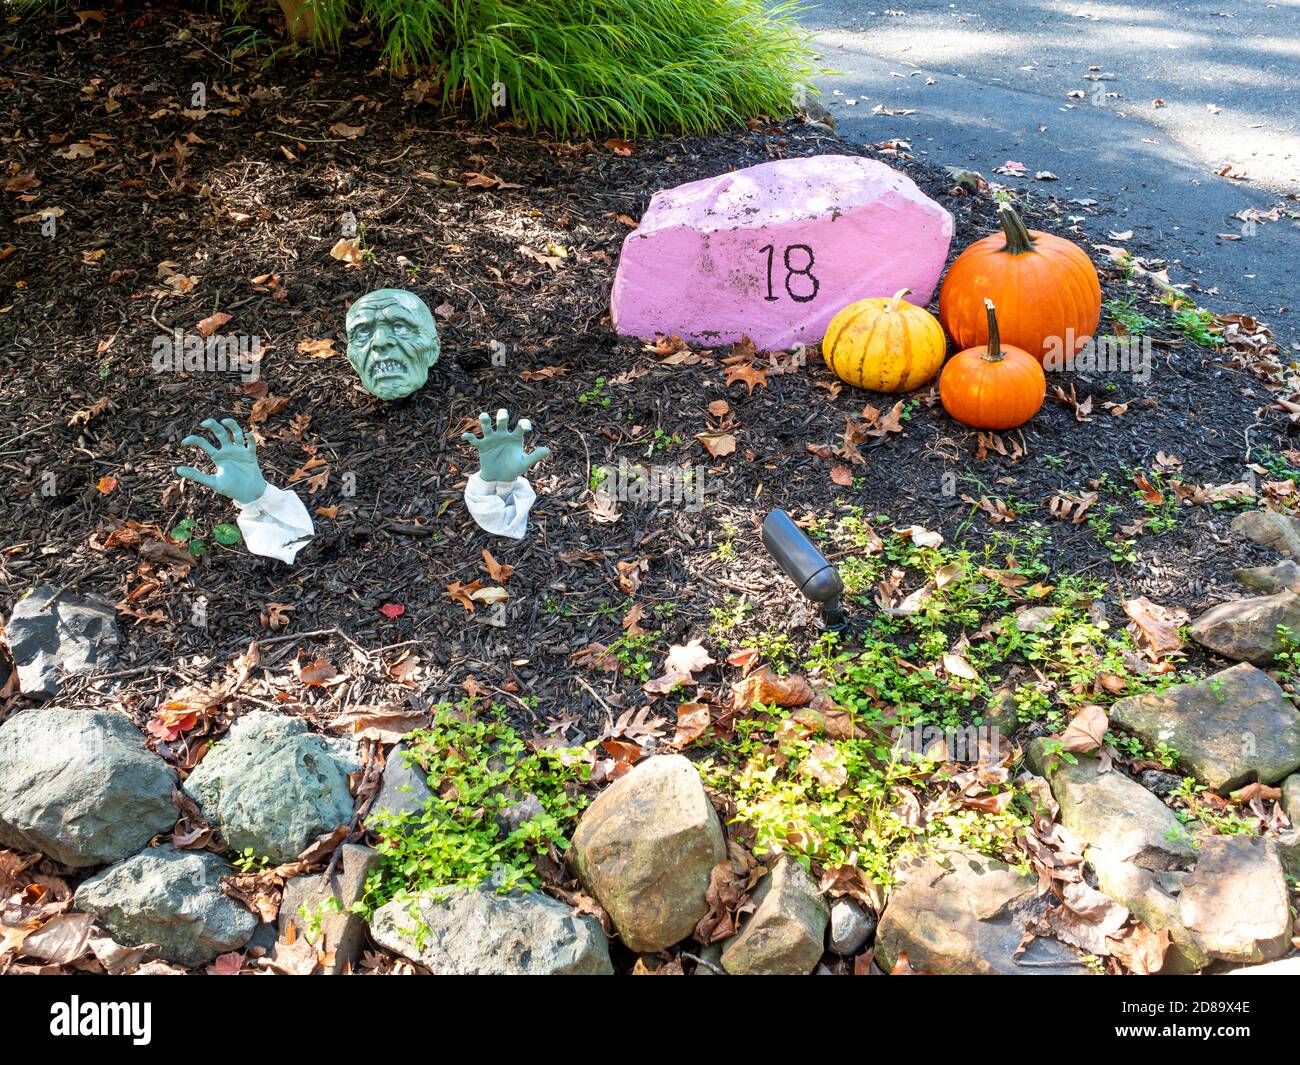 orange pumpkins and frightening Halloween character used as decoration outdoor Stock Photo